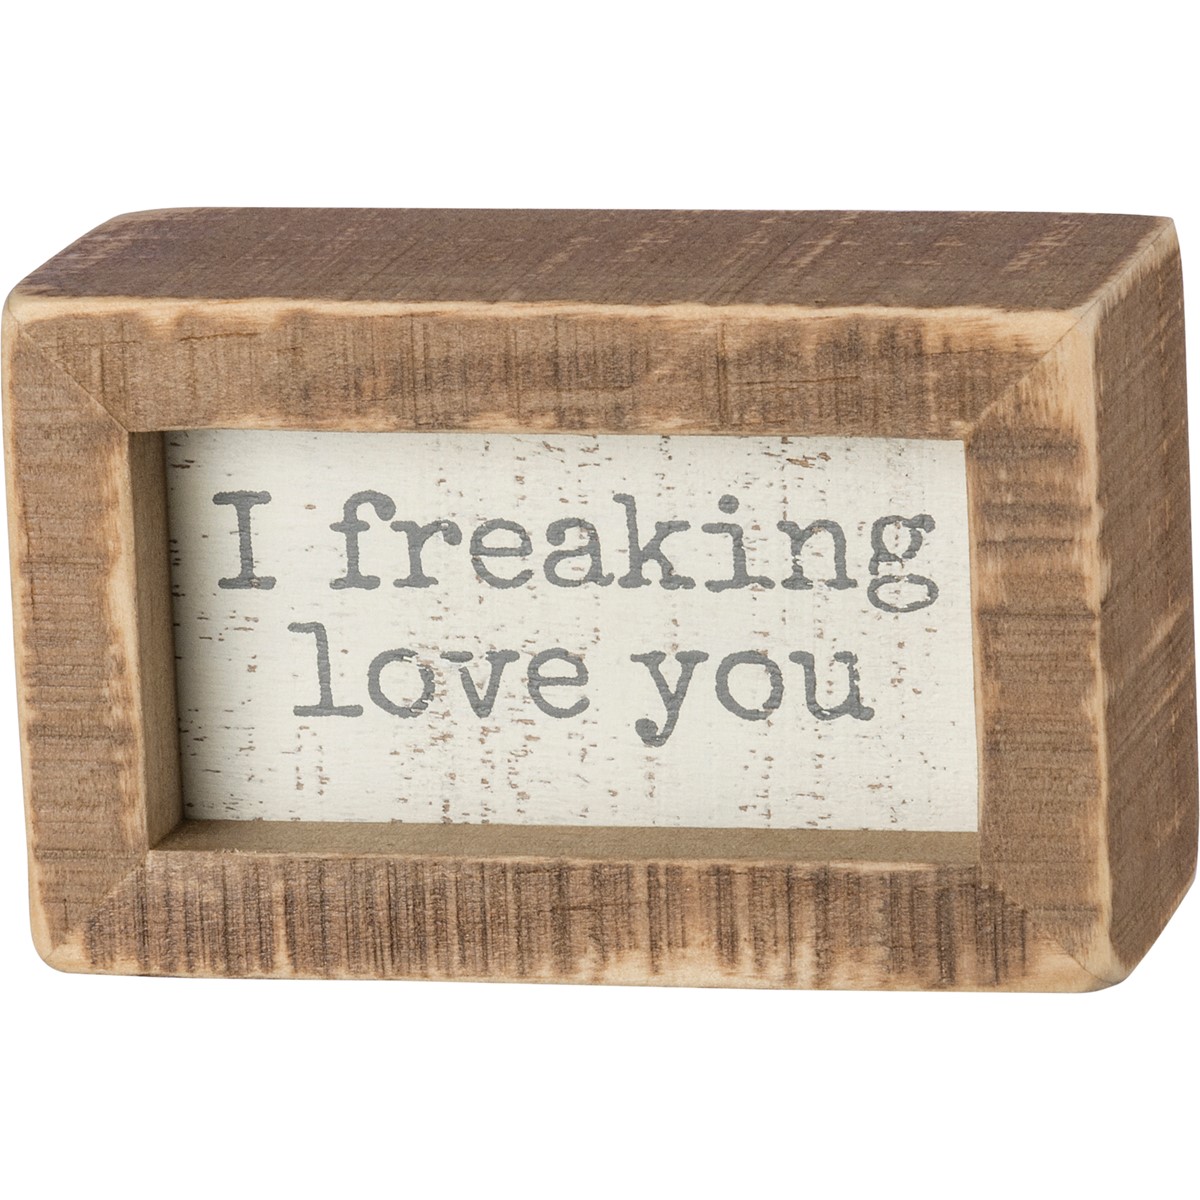 I Freaking Love You Inset Box Sign - Wood